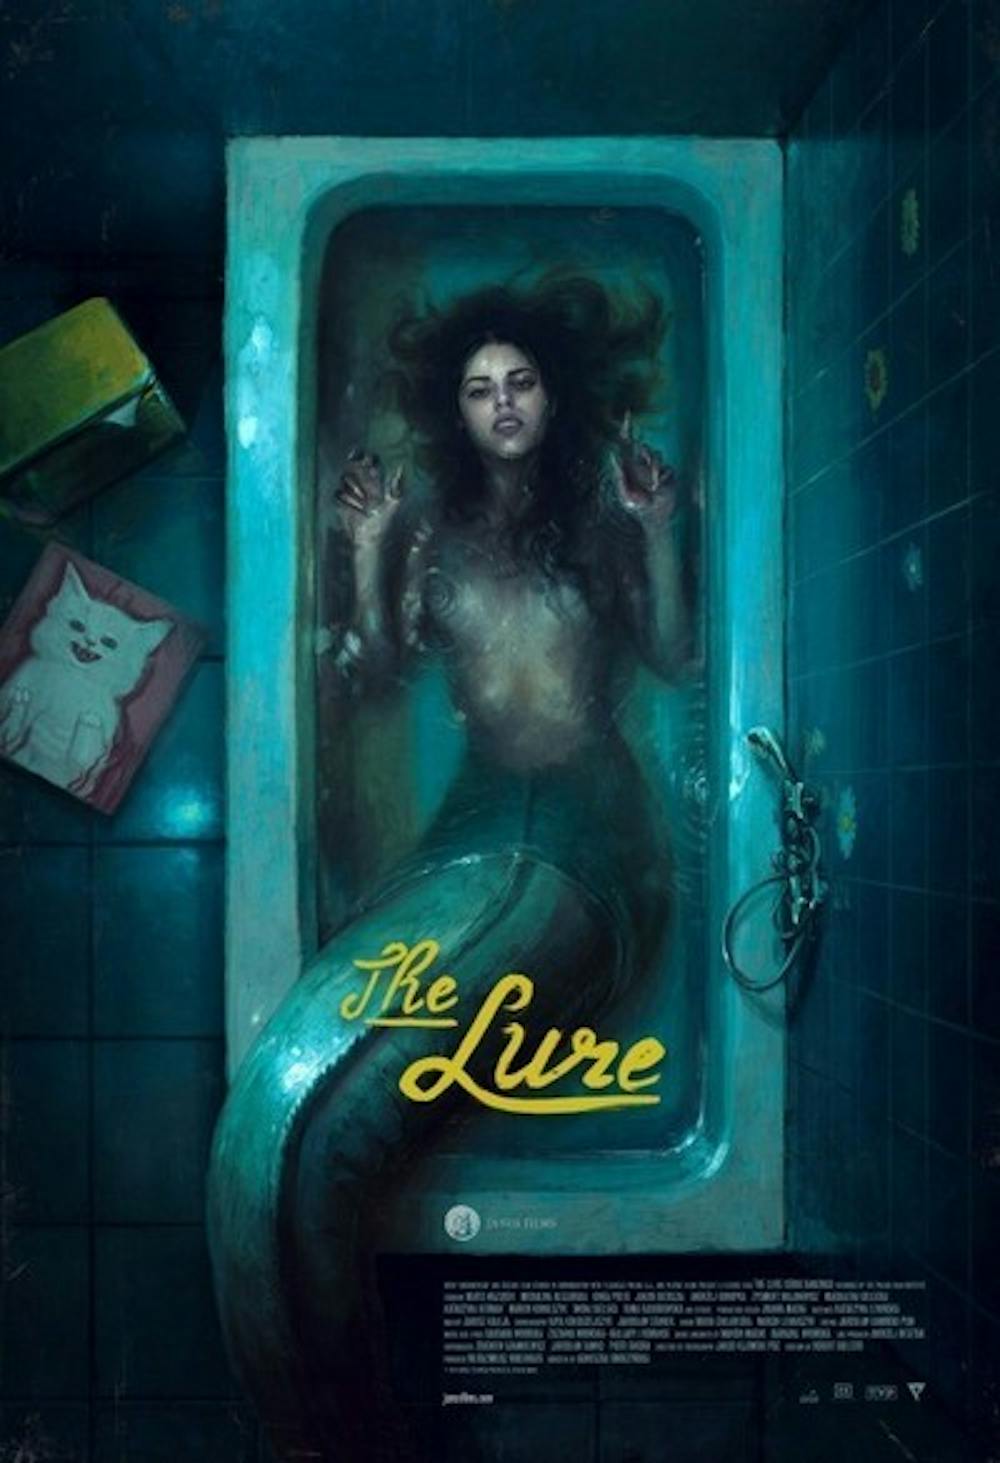 <p>Polish rock opera "The Lure" features&nbsp;cannibalistic&nbsp;mermaids and an exciting tale.</p>